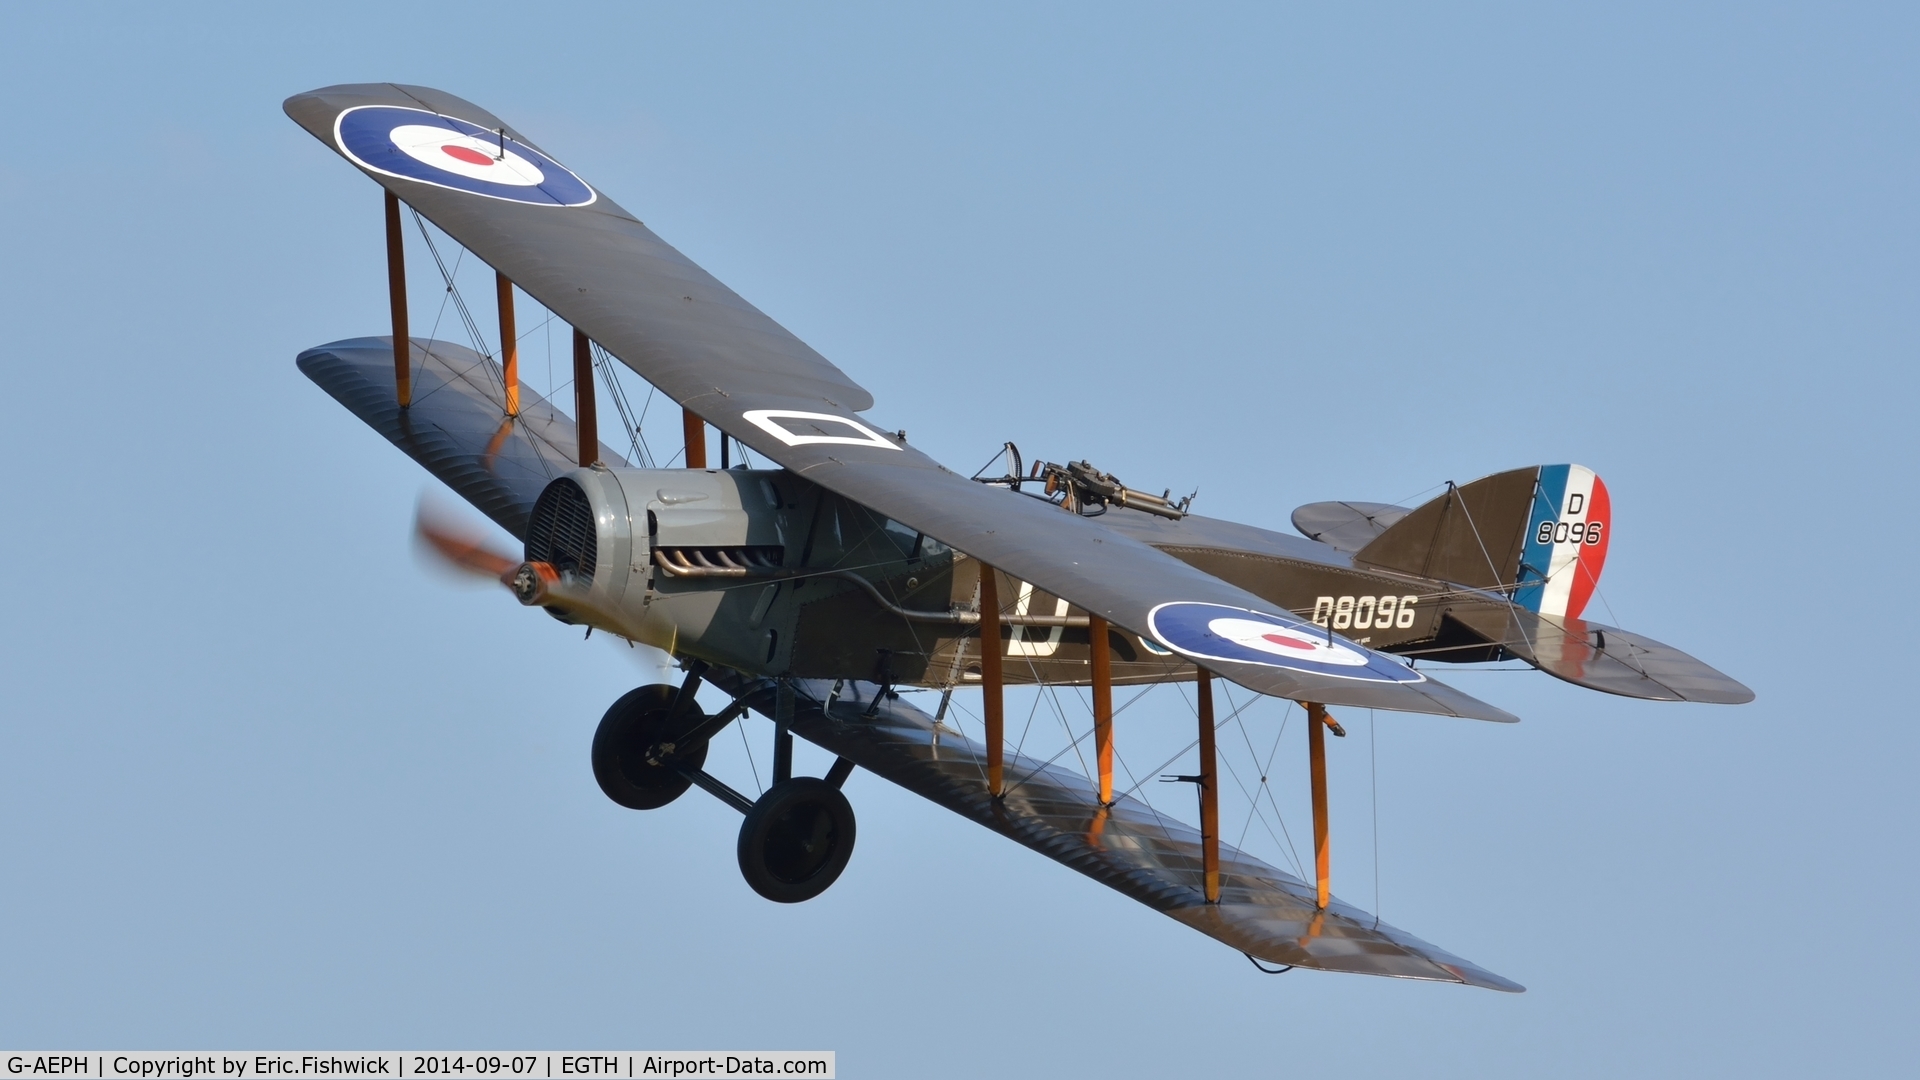 G-AEPH, 1918 Bristol F.2B Fighter C/N 7575, 43. D8096 in display mode at the glorious Shuttleworth Pagent Airshow, Sep. 2014.